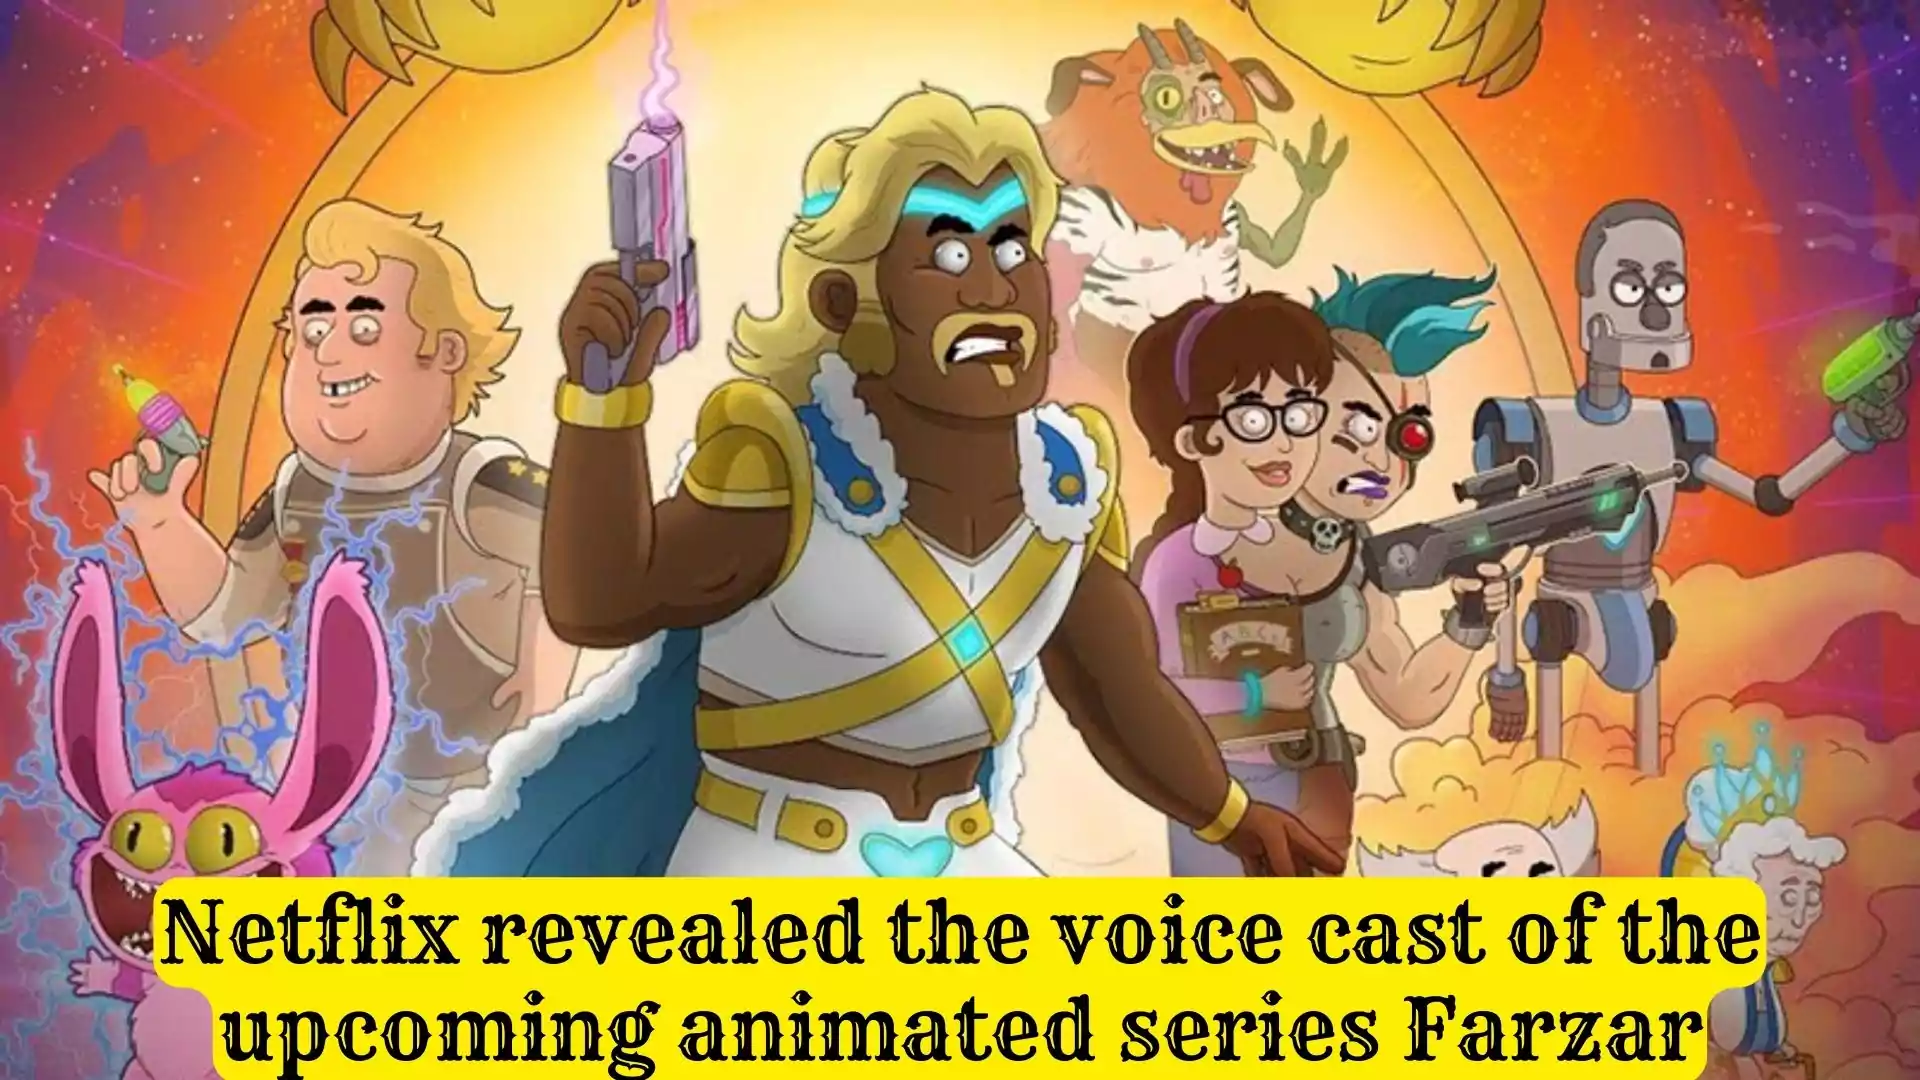 Netflix revealed voice cast of the upcoming series Farzar